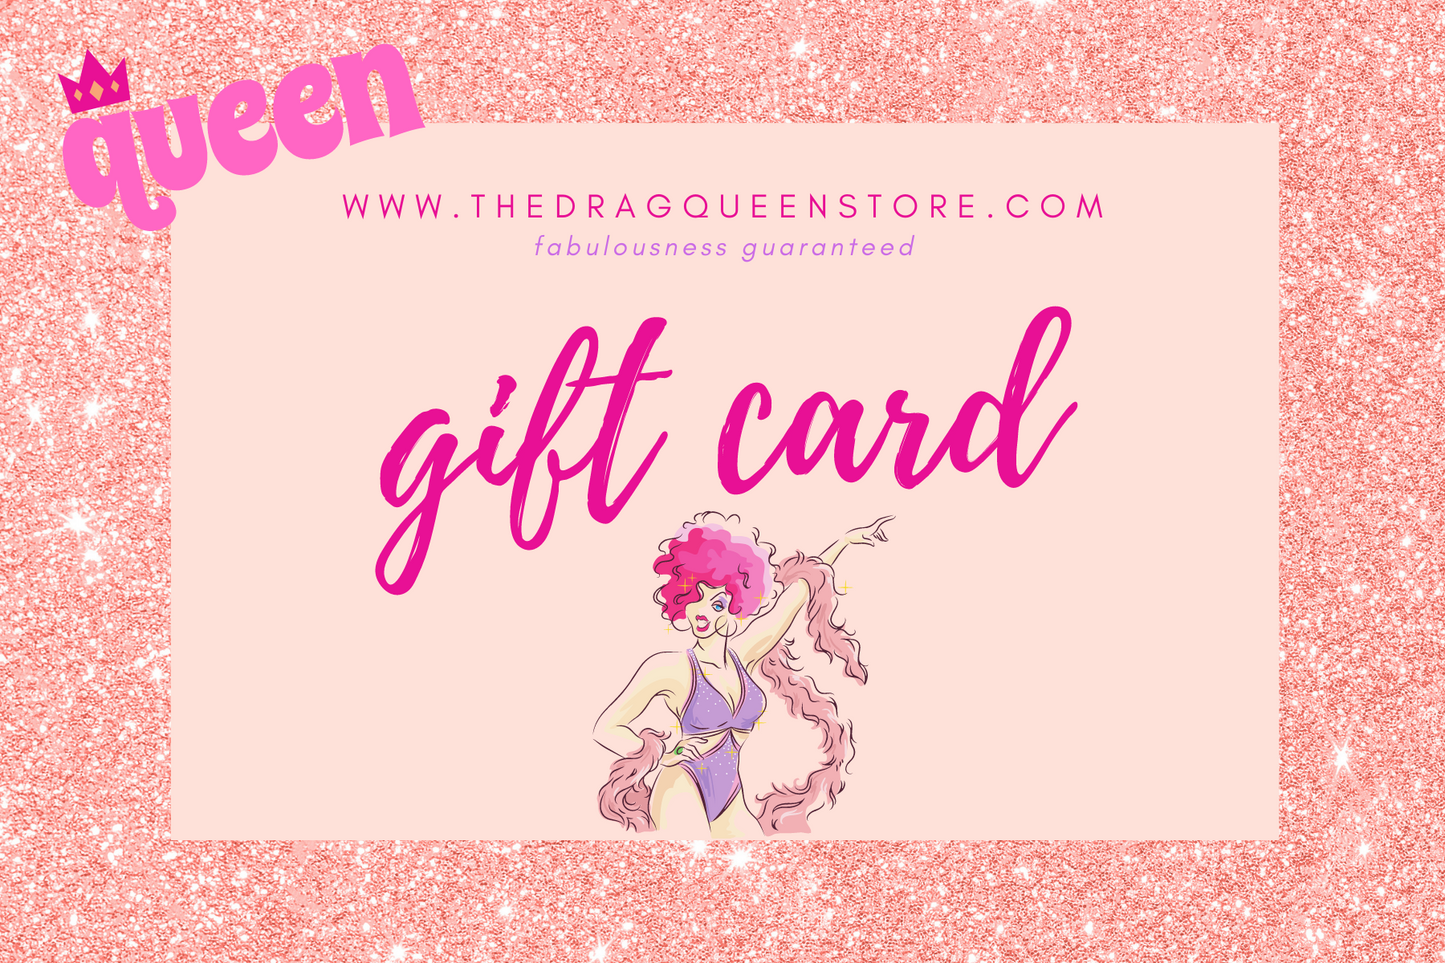 The Drag Queen Store Gift Card